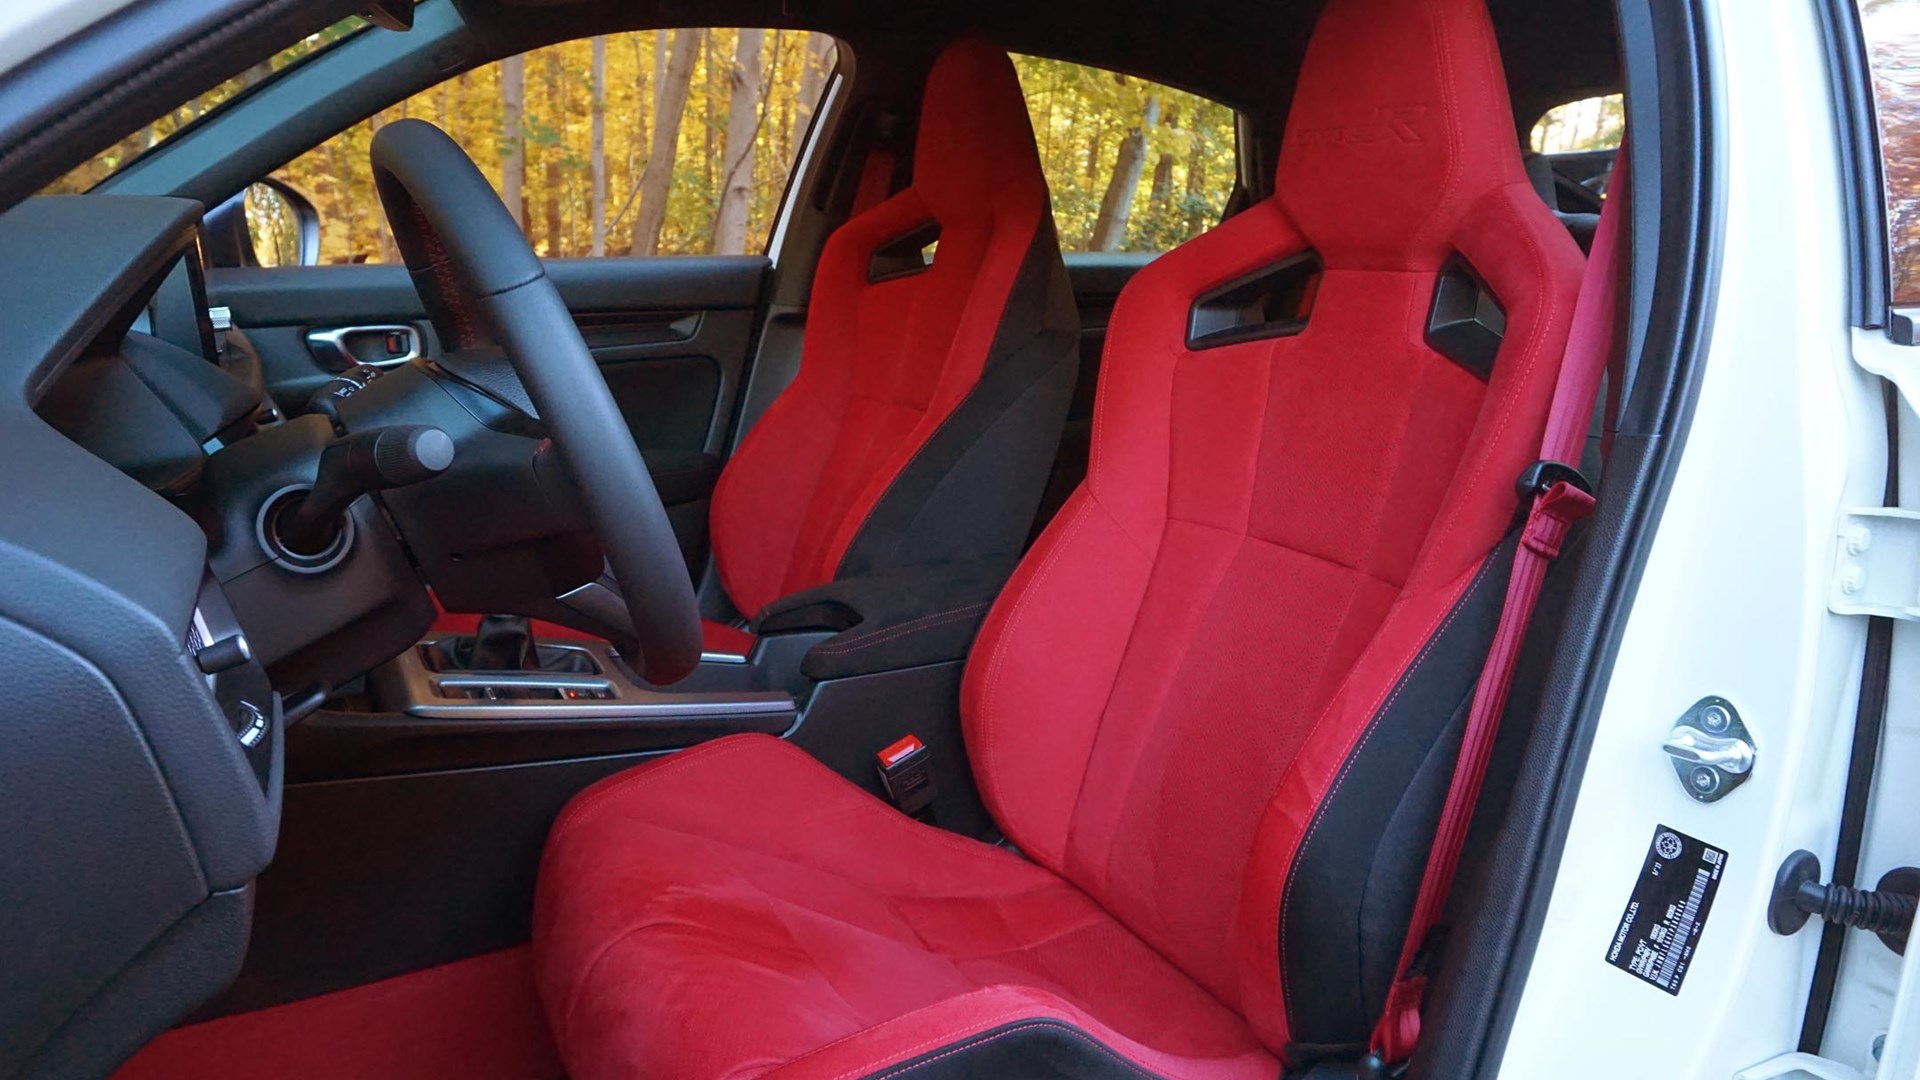 Premium PU Leather Red Seat Cushions For Honda Civic 11th Gen With Original  Design And Perfect Protection Internal Accessories Included From Lshl520,  $312.35